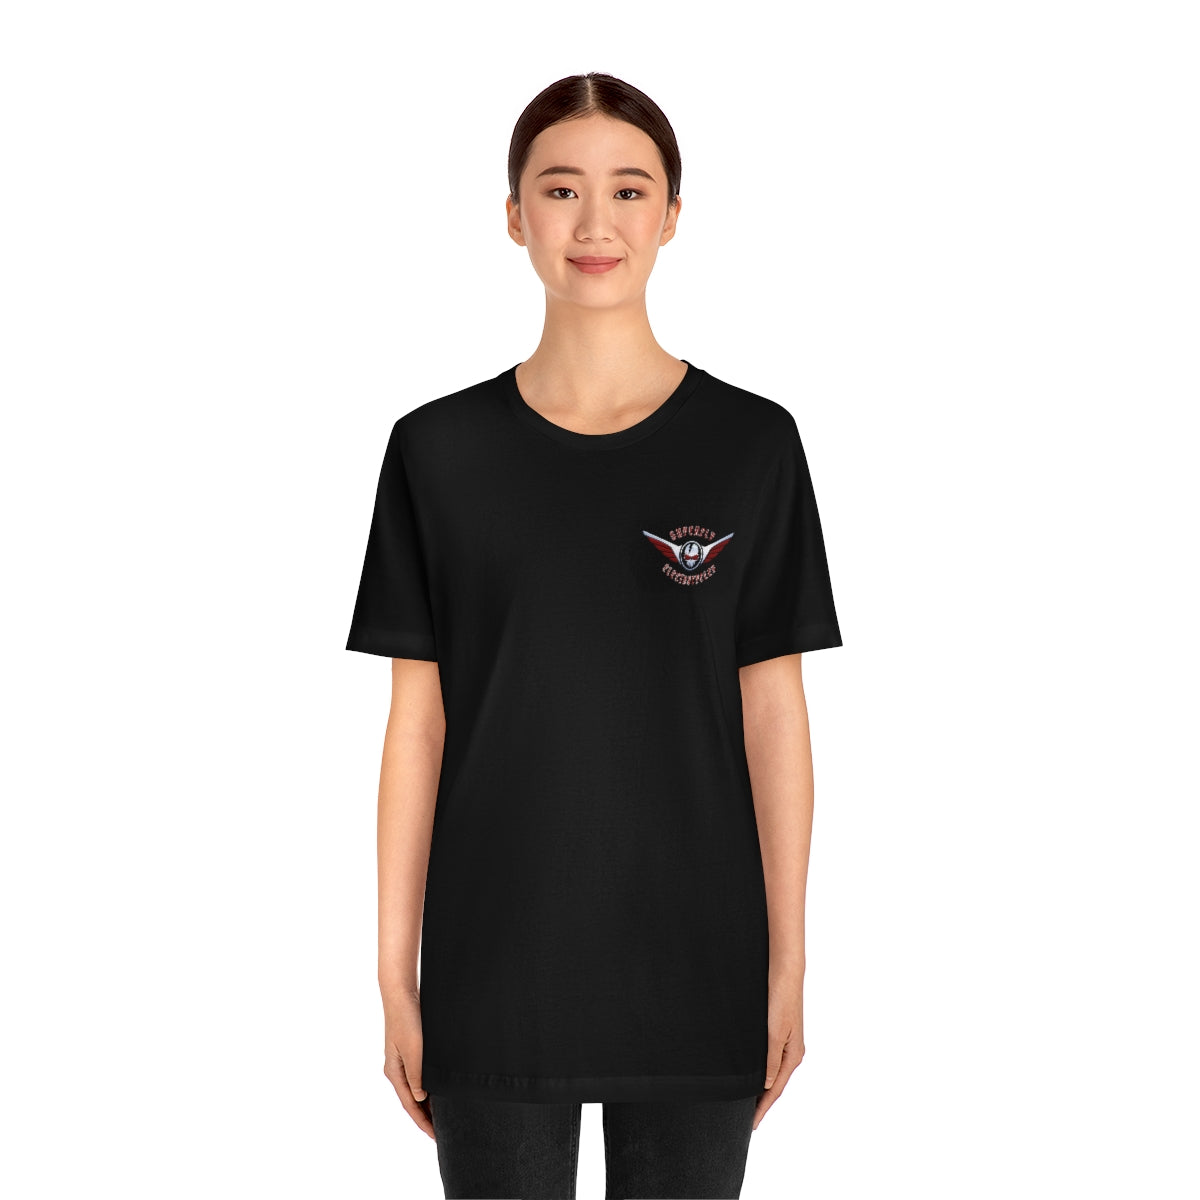 Official Superfly Electrocycle Shop Tee Shirt (F/B Print)- Unisex Jersey Short Sleeve Tee